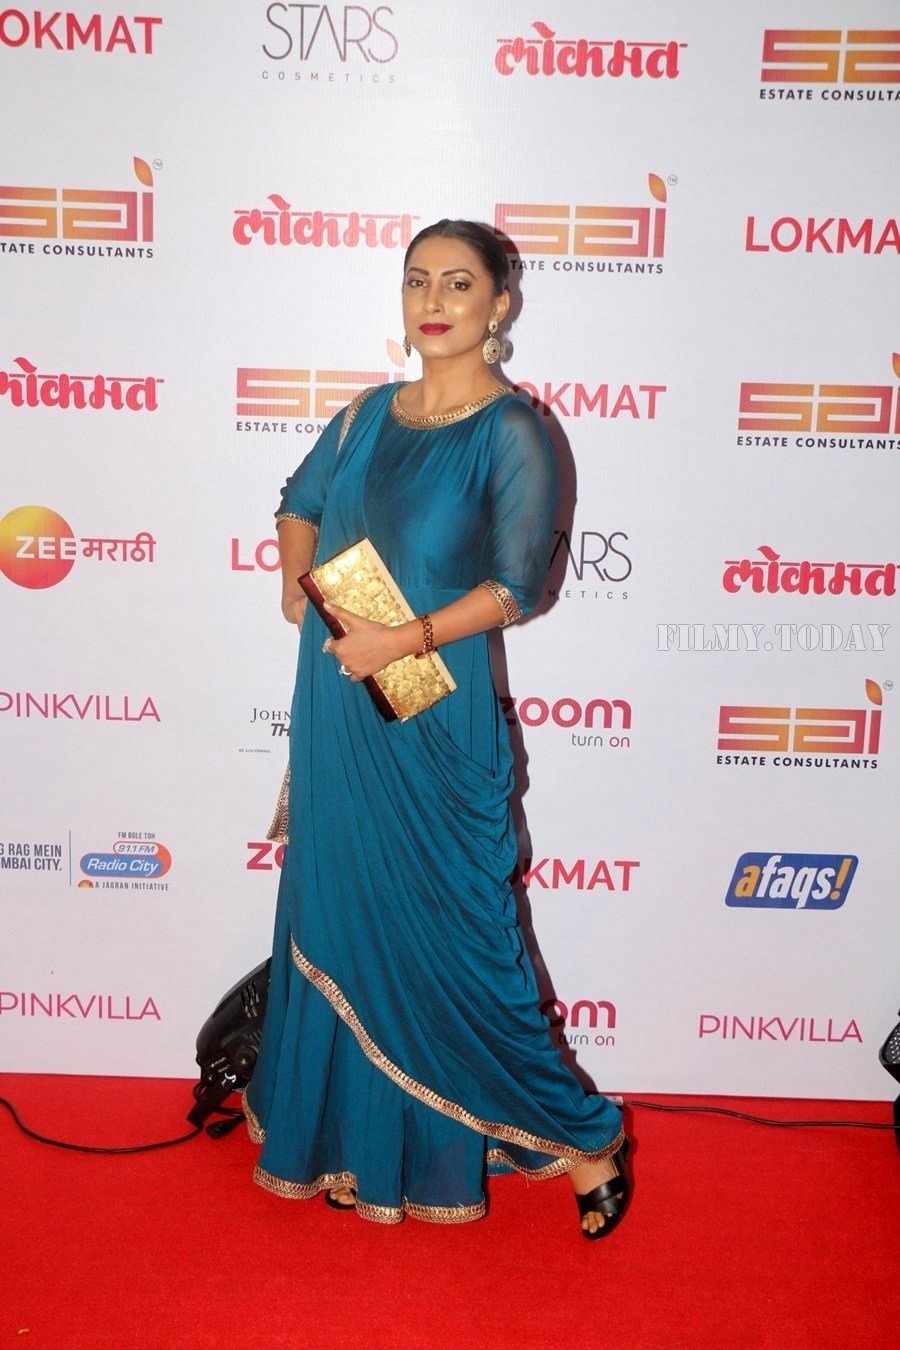 Kranti Redkar - In Pics: Red Carpet Of 2nd Edition Of Lokmat Maharashtra's Most Stylish Awards 2017 | Picture 1544798